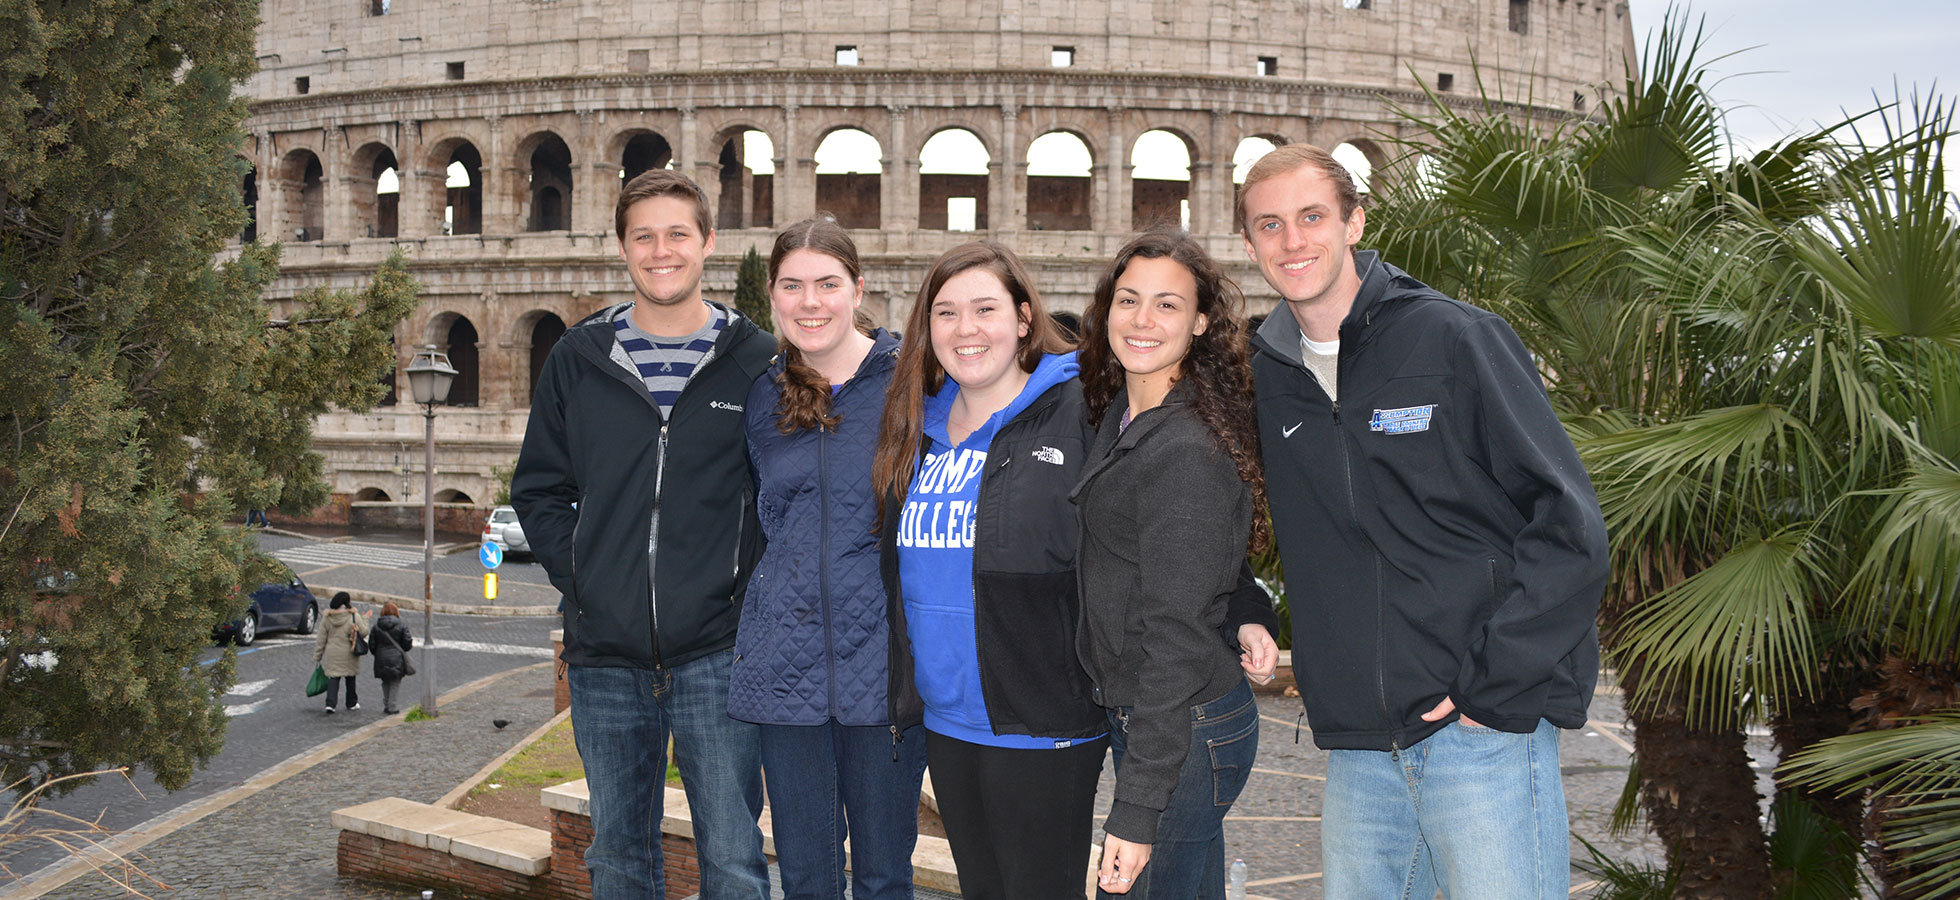 Assumption students outside of the Colosseum in Rome, Italy.